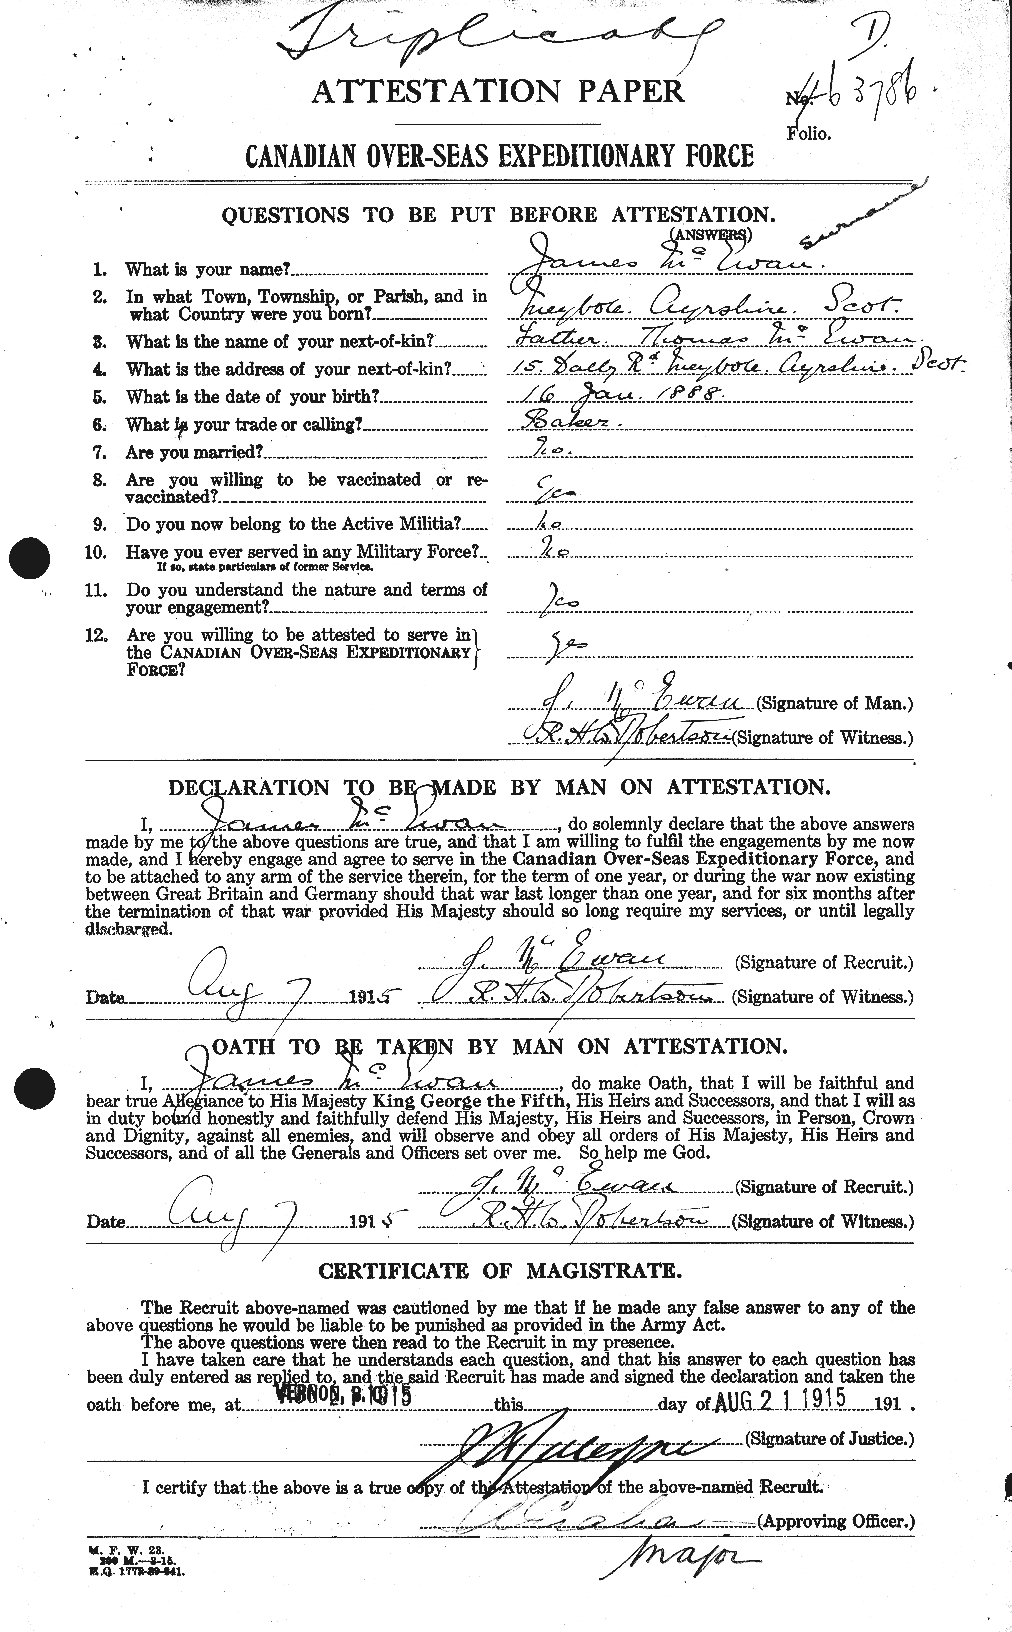 Personnel Records of the First World War - CEF 522228a